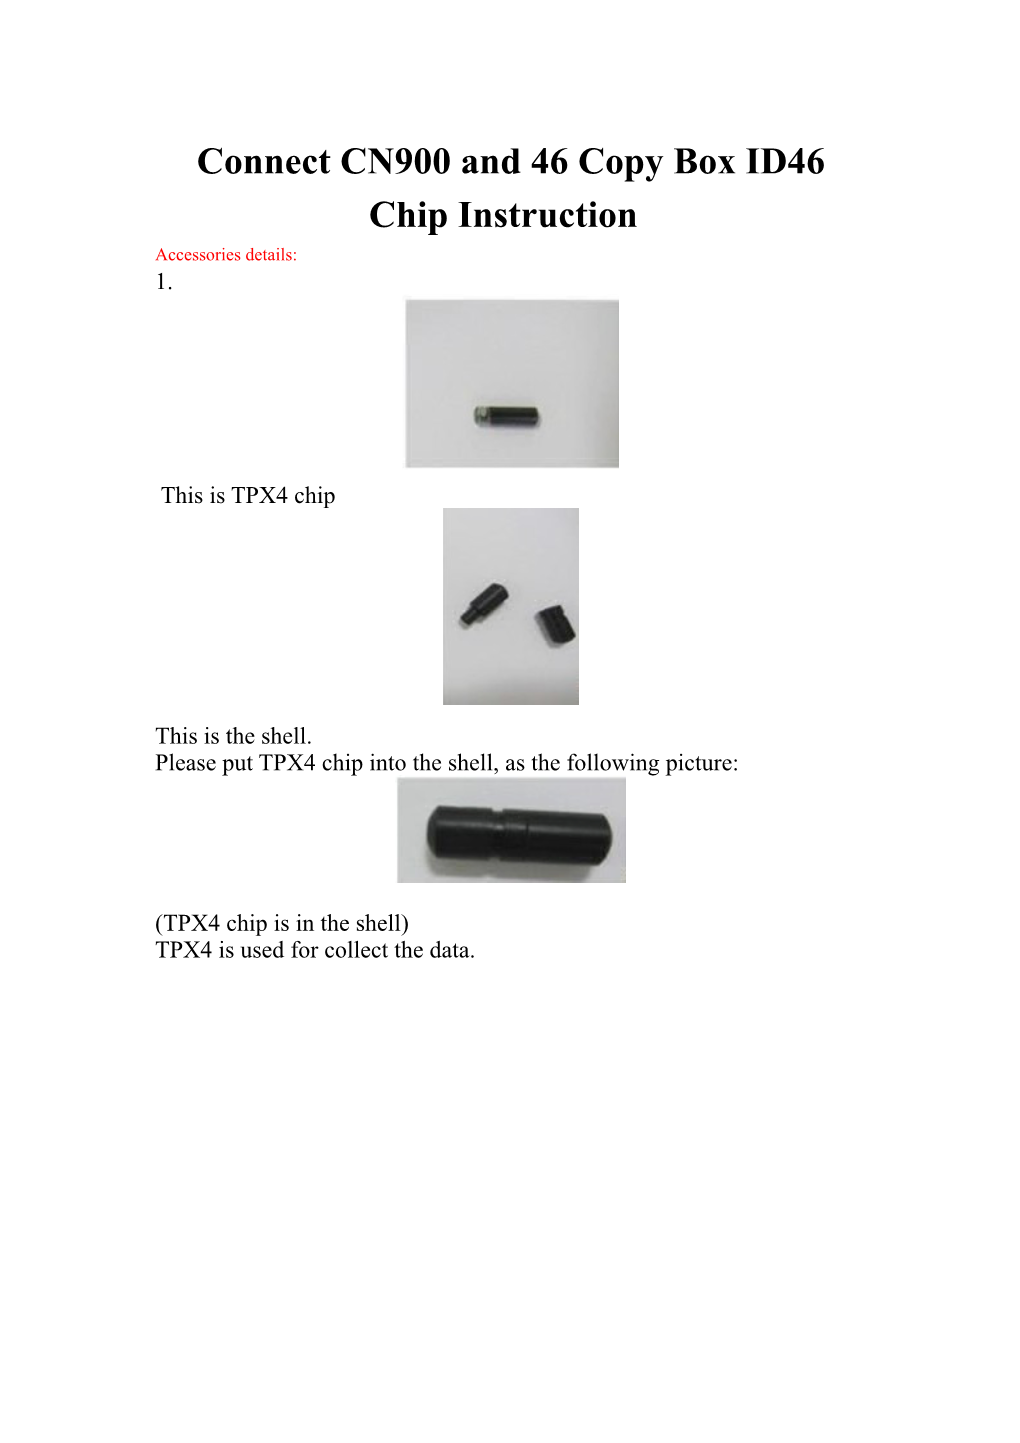 Connect CN900 and ID46 Copy Box Chip Instruction